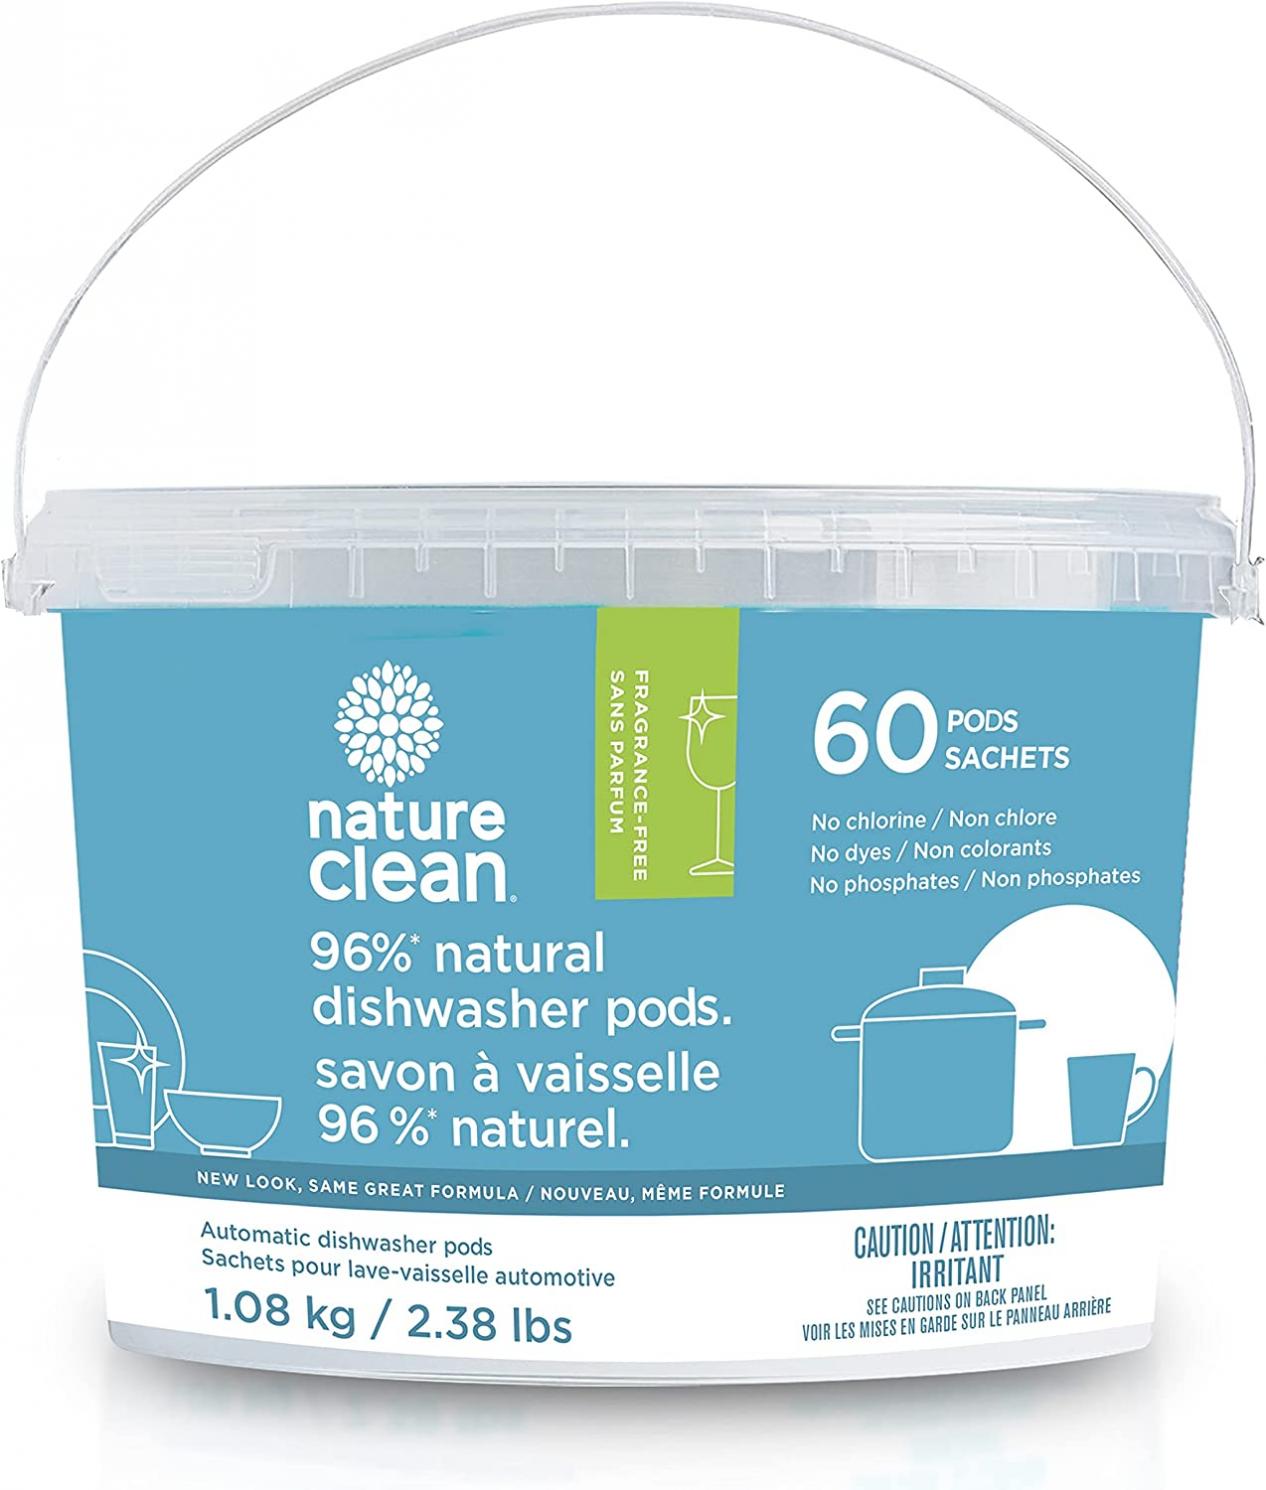 Nature Clean Natural Dishwasher Pods, 60 count. High Performance Dishwasher Detergent Pods With 96% Naturally Derived Ingredients From Plants And Minerals. Spot & Residue-Free, No chlorine, Unscented